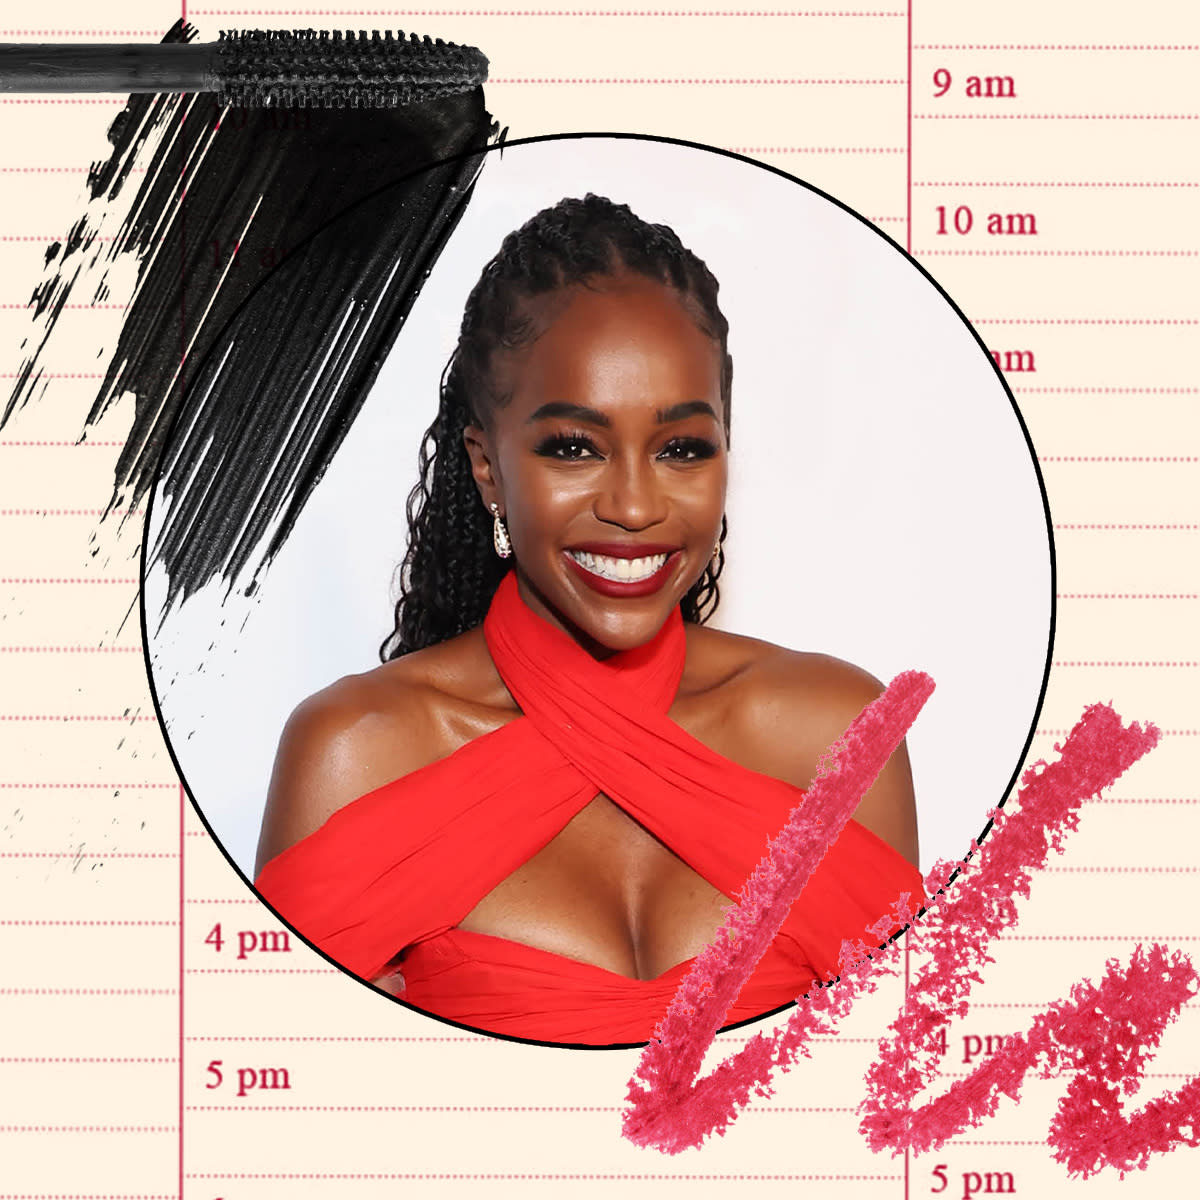  Aja naomi king on a calendar with beauty products. 